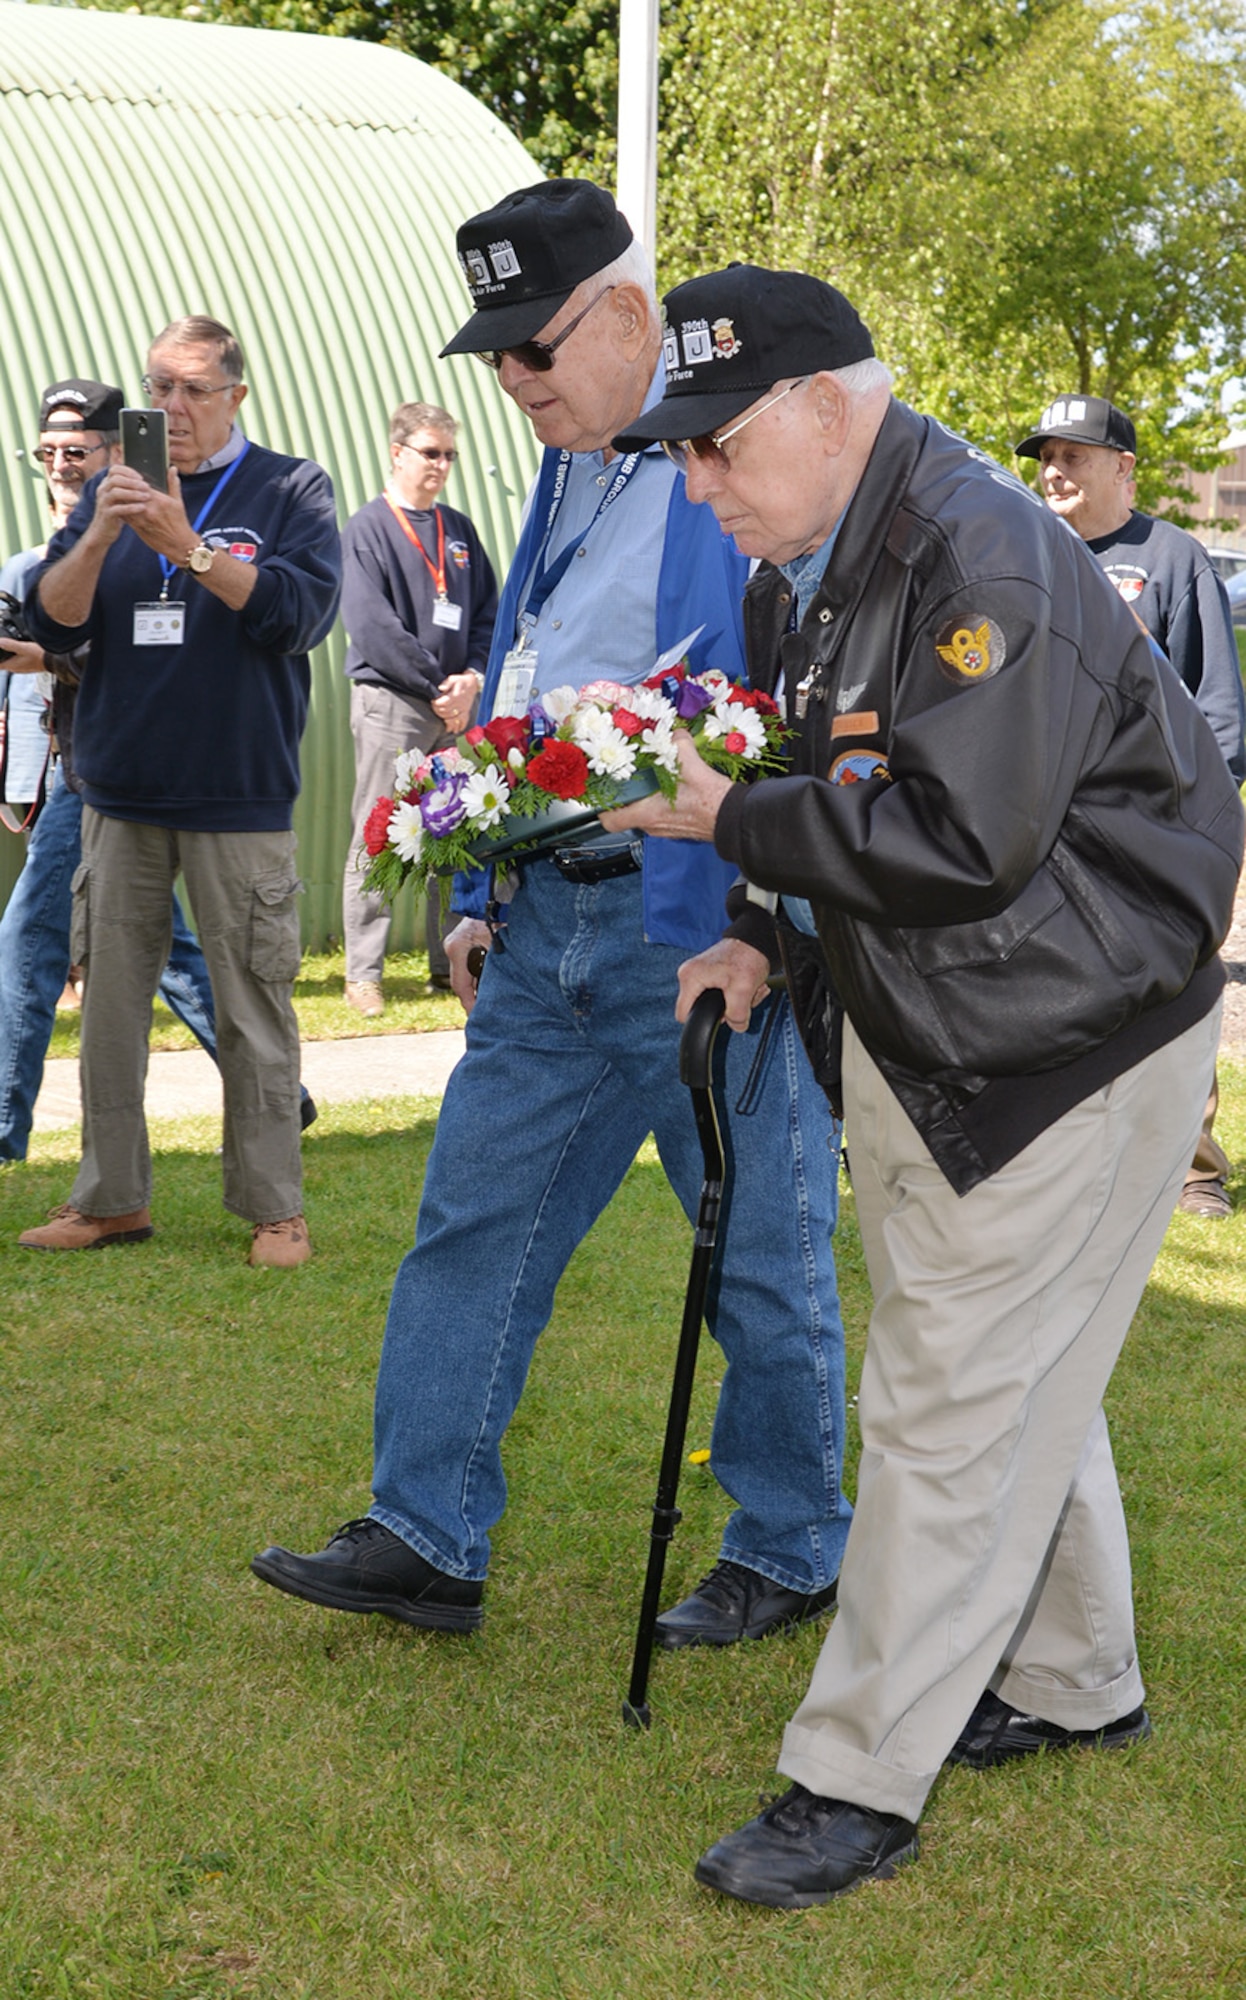 Veterans of the 100th Bombardment Group (Heavy), Master Sgt. (retired) Dewey Christopher, center, and Staff Sgt (retired) Joe Urice, right, prepare to lay a wreath May 10, 2017, at Parham Airfield Museum, Framlingham, Suffolk. The 100th Bomb Group veterans visited England with family members and others from the 100th BG Foundation as part of the 100th anniversary of the 100th BG and 25th anniversary of the 100th Air Refueling Wing and toured former East Anglian World War II bases including Thorpe Abbots, Horham and Rattlesden. (U.S. Air Force photo by Karen Abeyasekere)